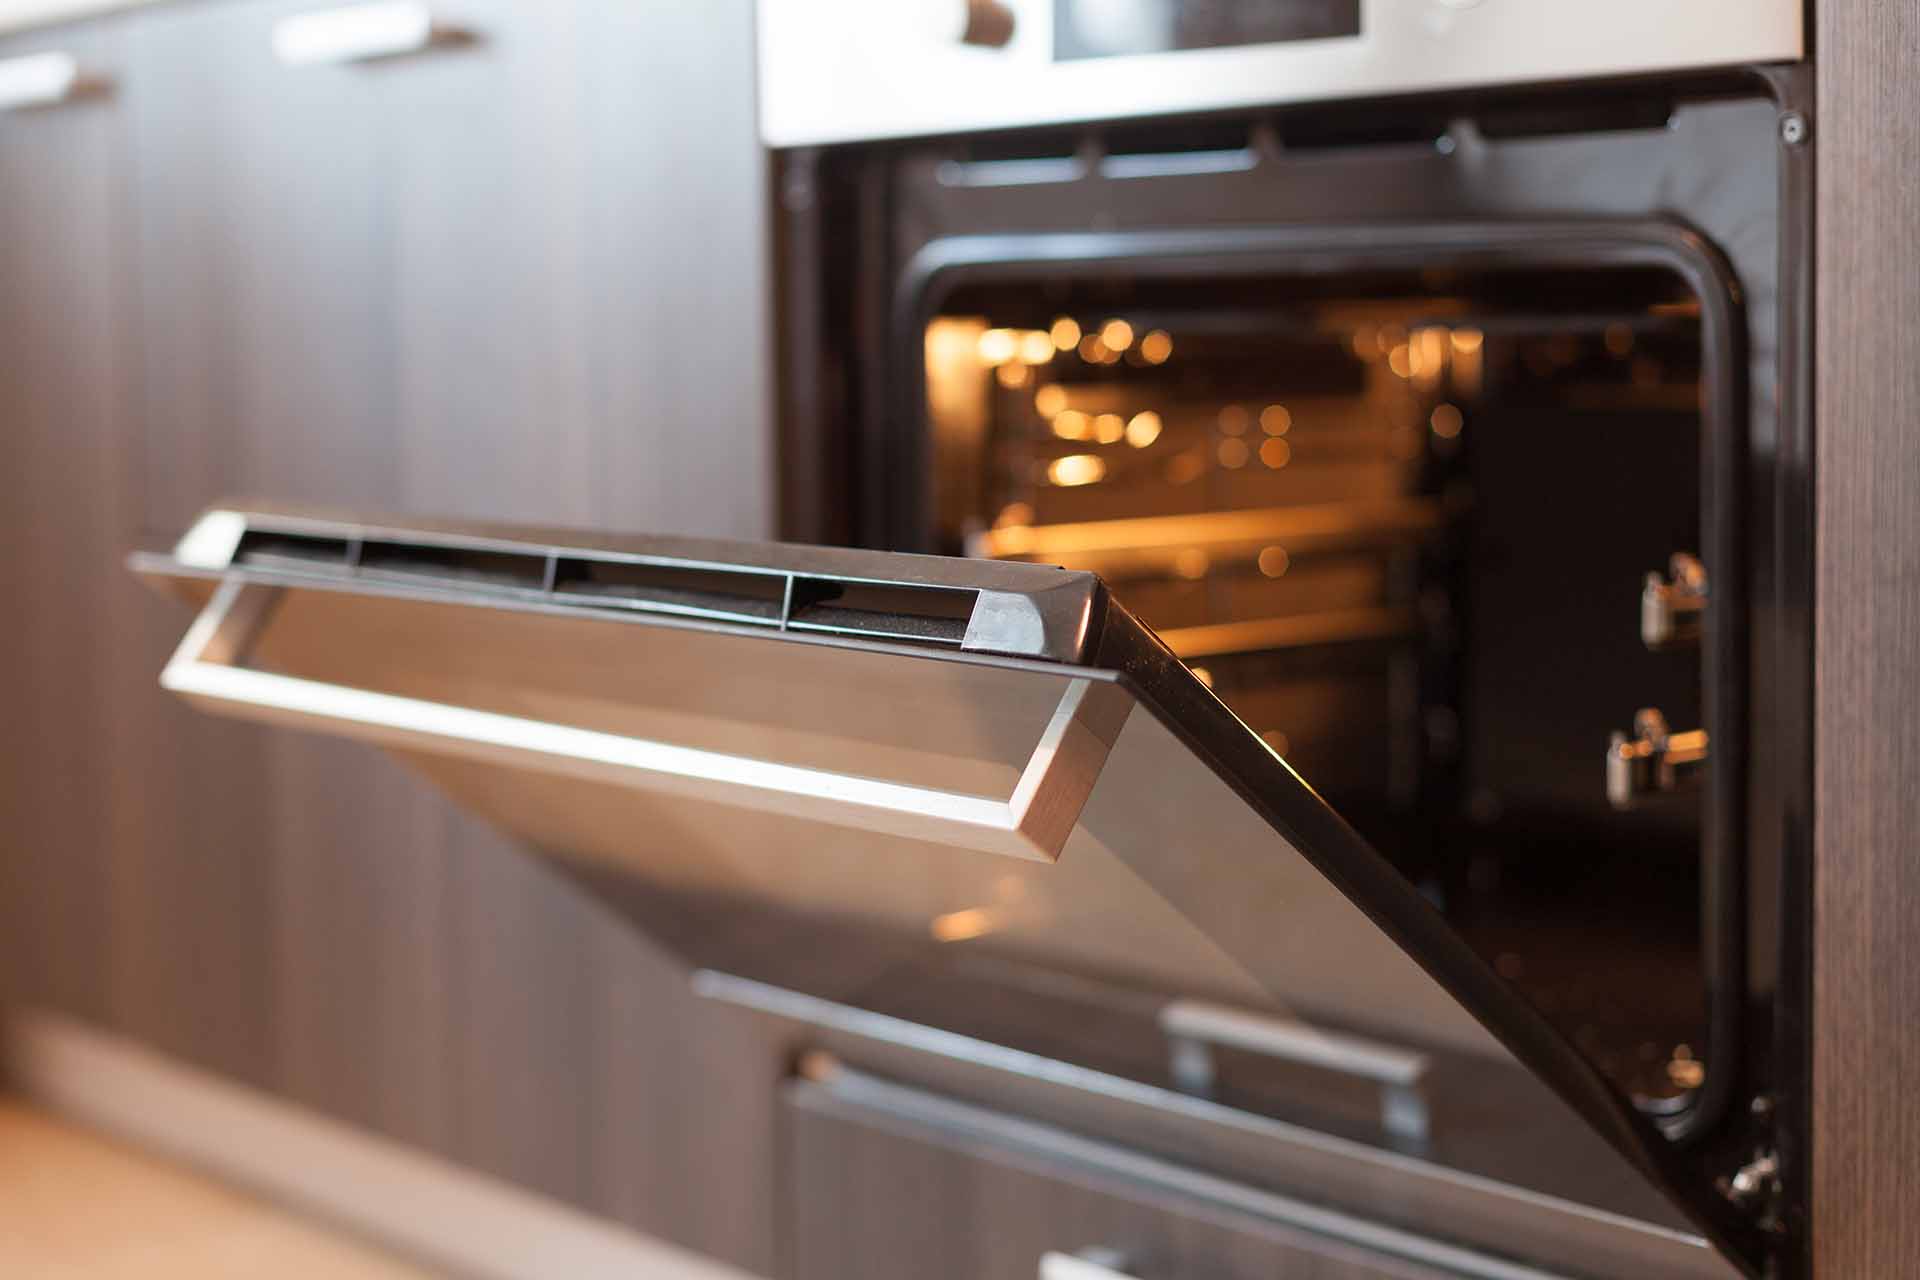 How much do you save by leaving your oven light on? 